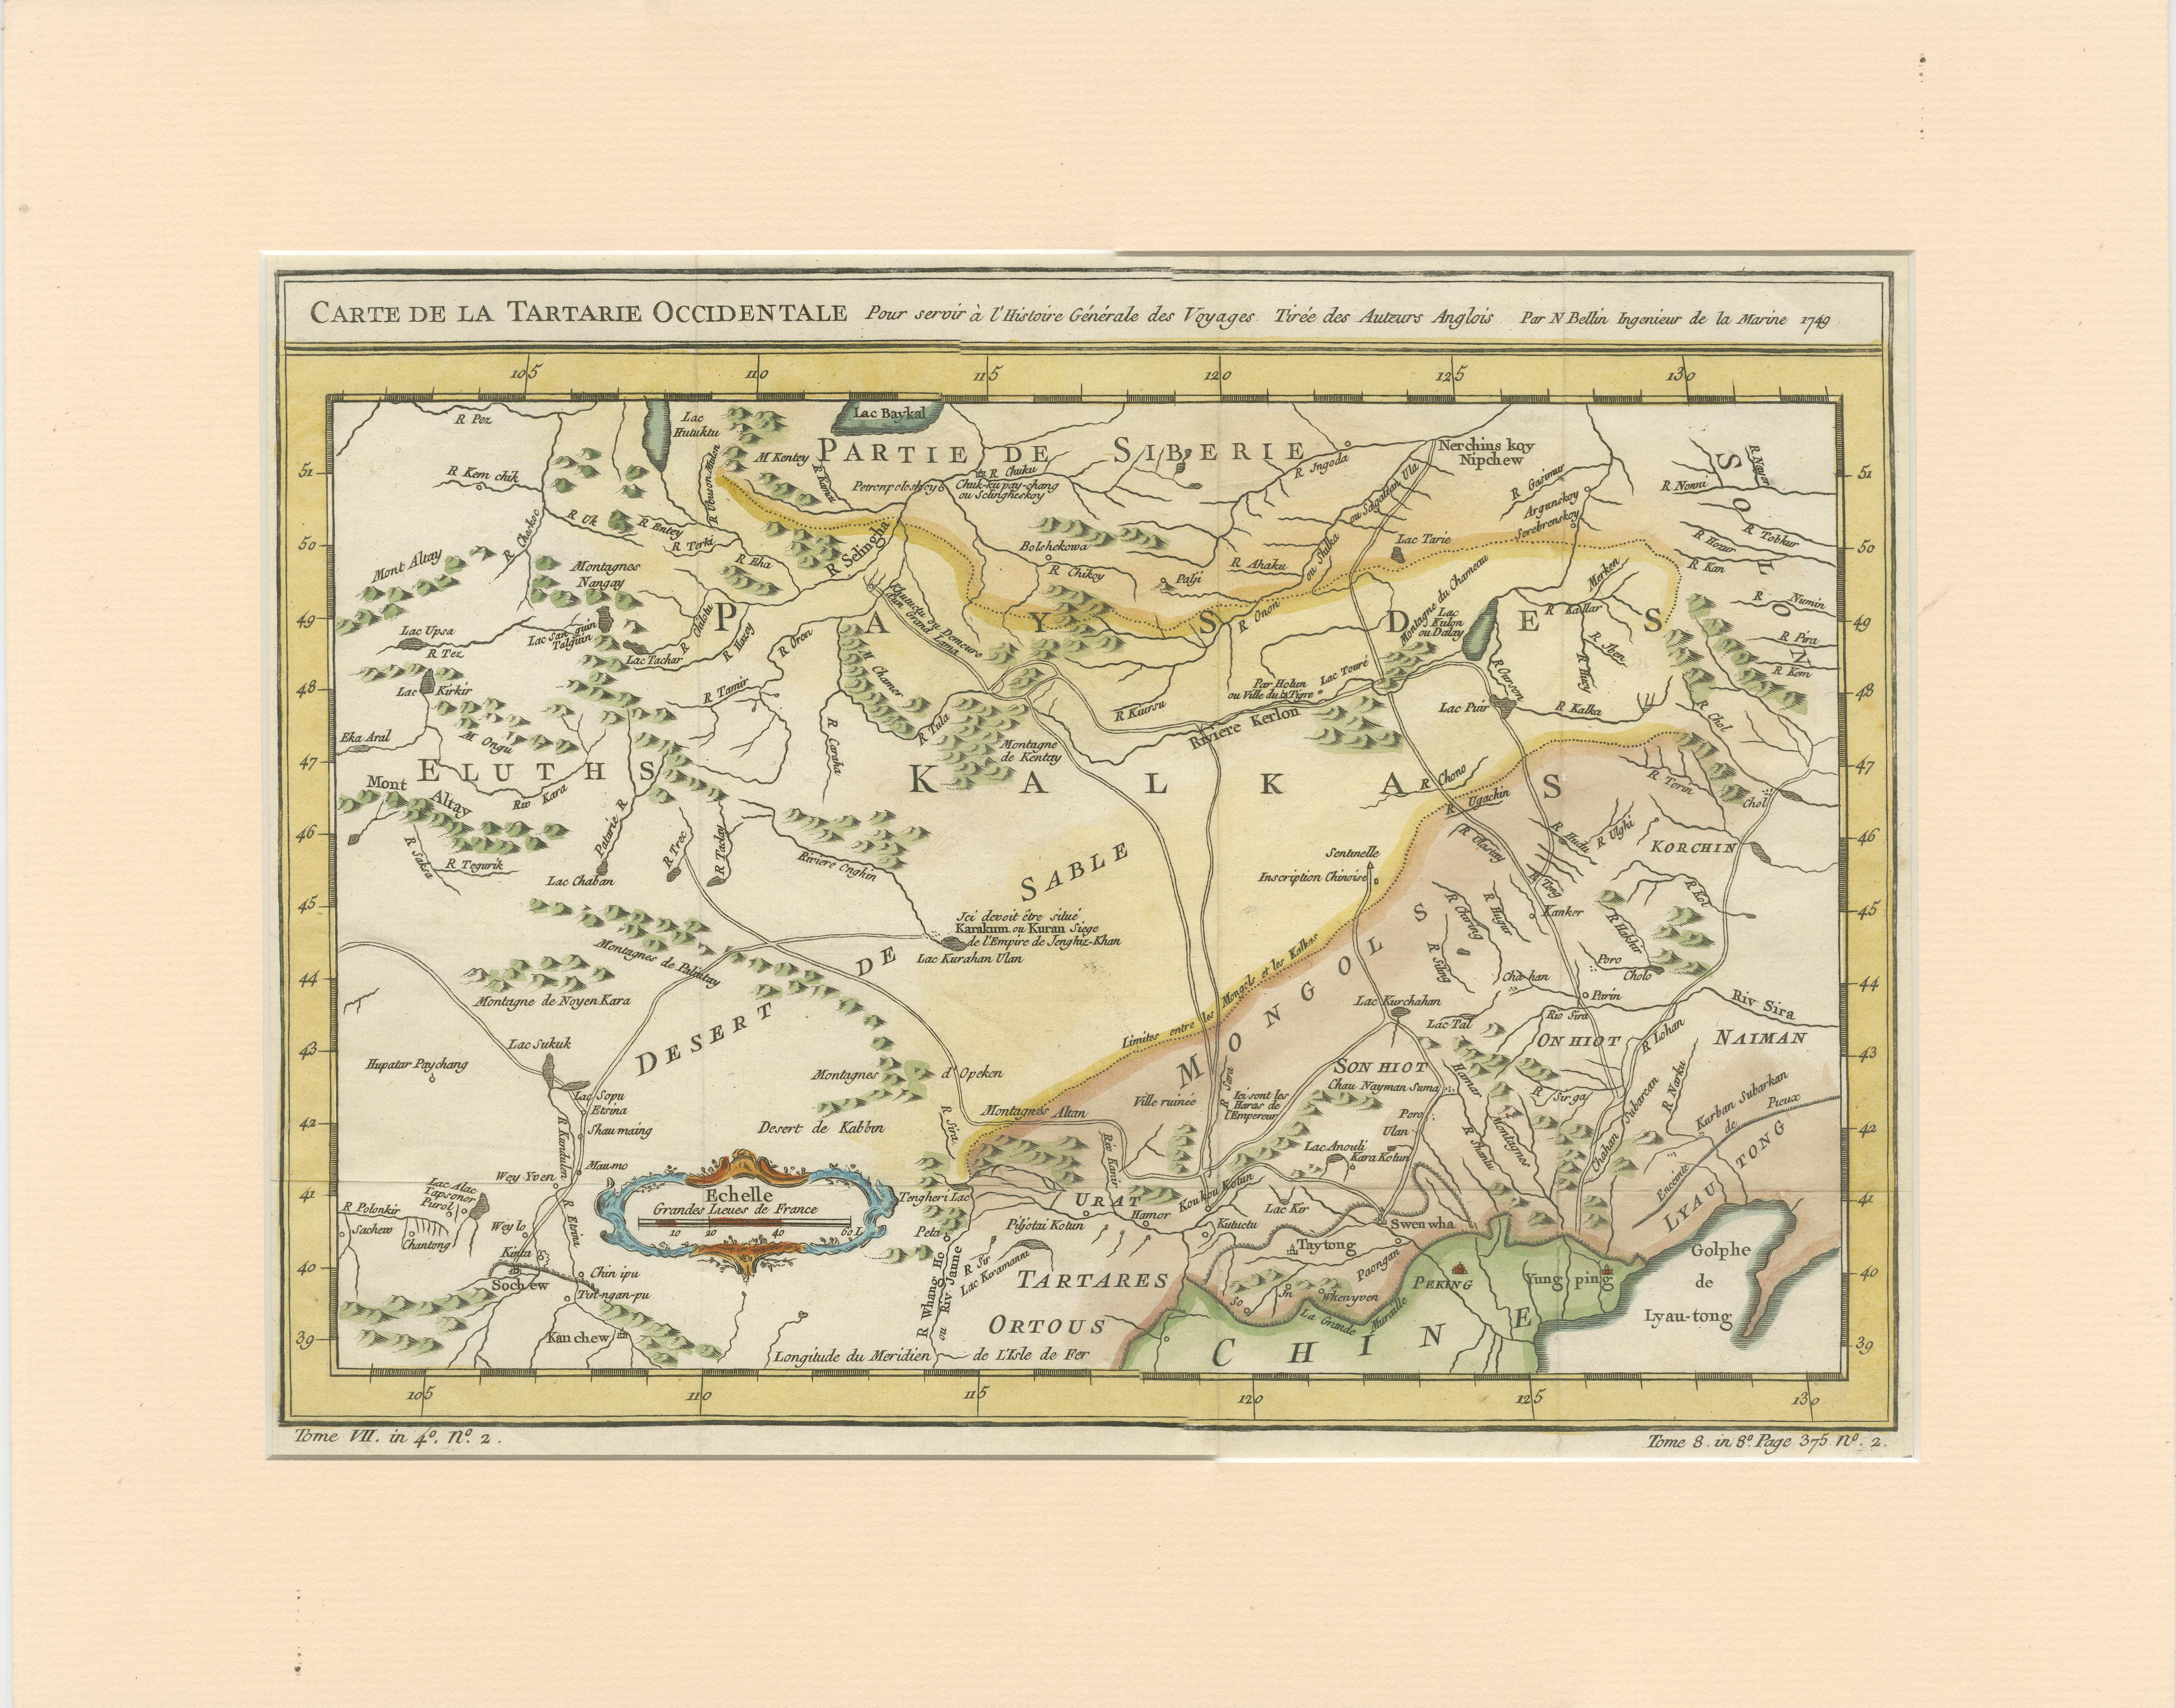 Antique map titled 'Carte de la Tartarie Occidentale'. An interesting map of Tartary and northeast Asia, from Lake Baykal, Partie du Siberia in the north, Pays des Kalkas at the center, as well as Desert de Sable, and down to Chine and the Gulf de